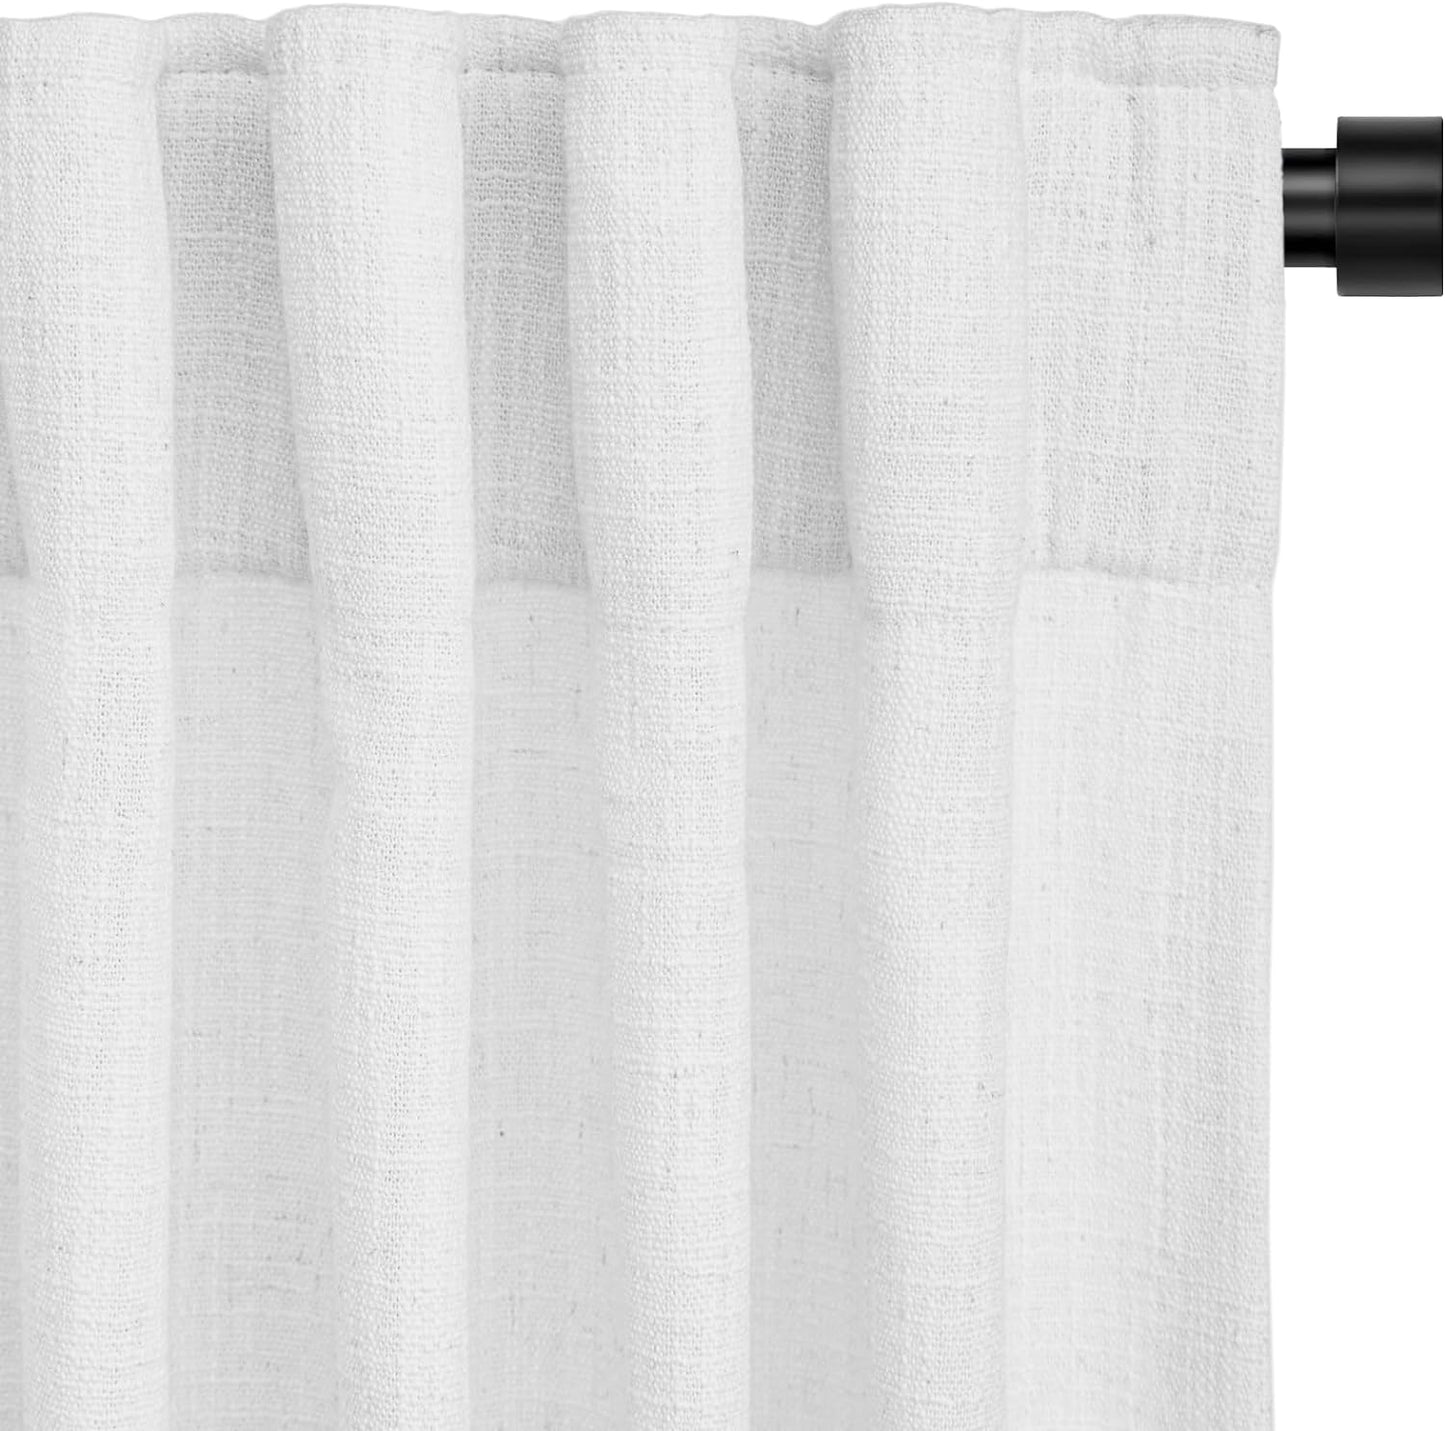 INOVADAY Beige White Linen Curtains 96 Inches Long for Living Room Bedroom, Back Tab Sheer Privacy Curtains 96 Inch Length 2 Panels, Light Filtering Farmhouse Curtains & Drapes Cream Colored, W50Xl96  INOVADAY 02 White 50"W X96"L 